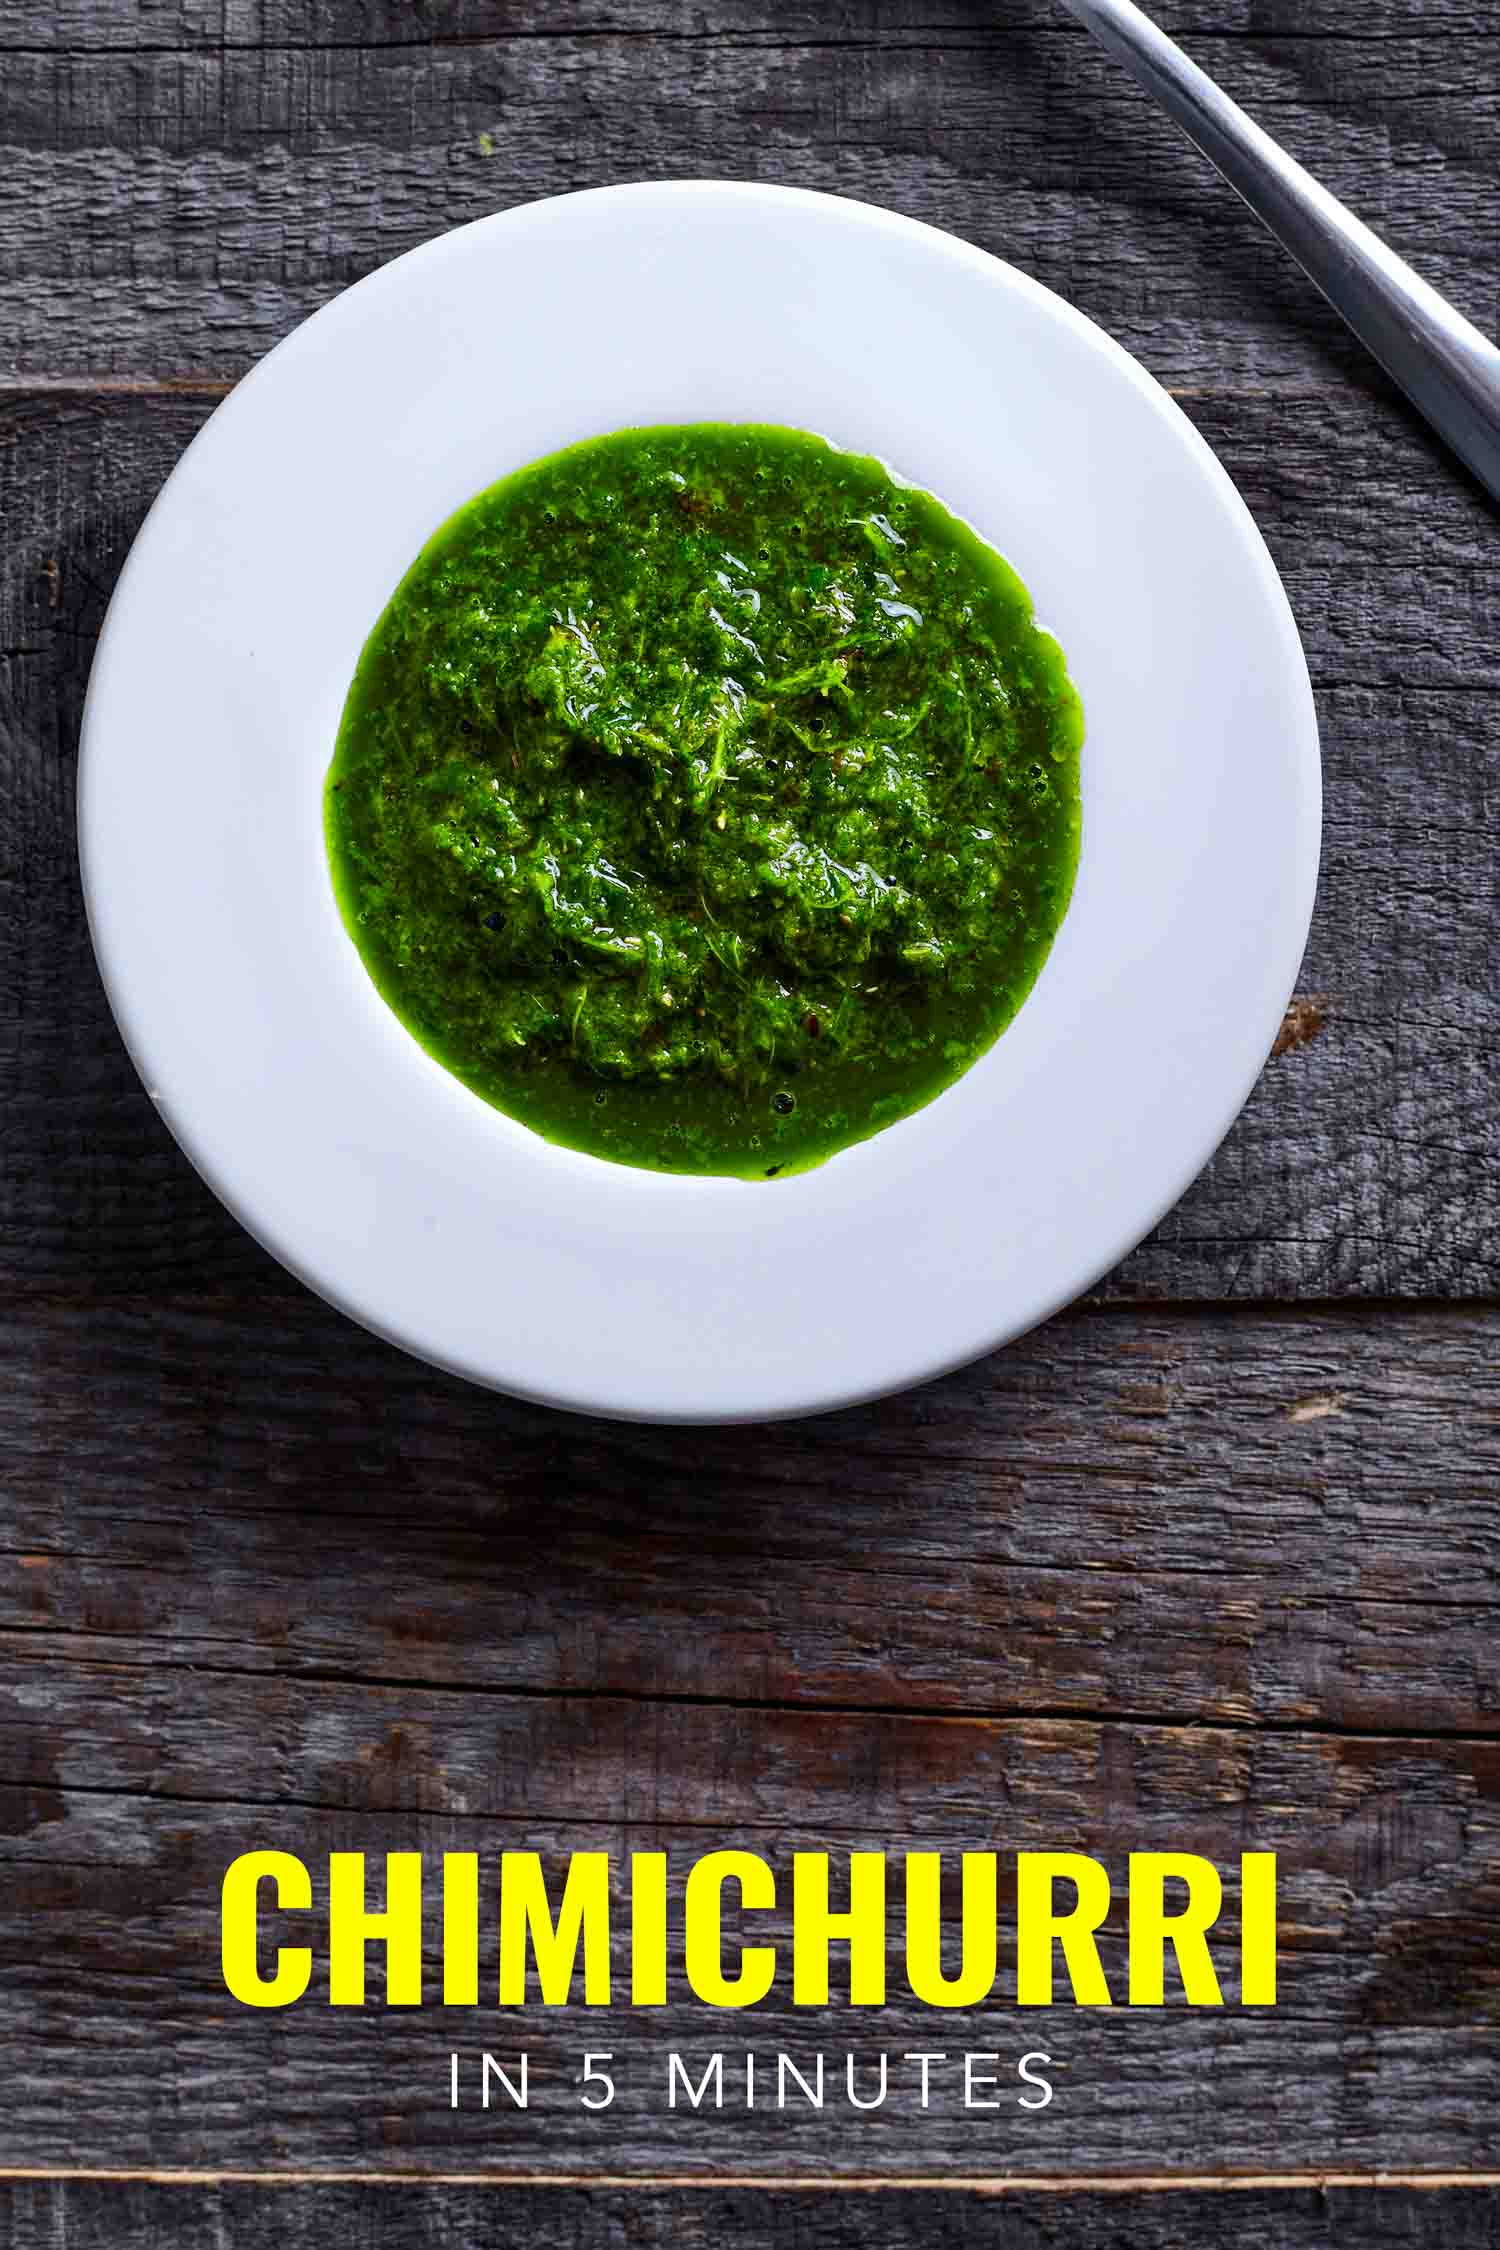 Chimichurri in a white bowl on a wooden background.